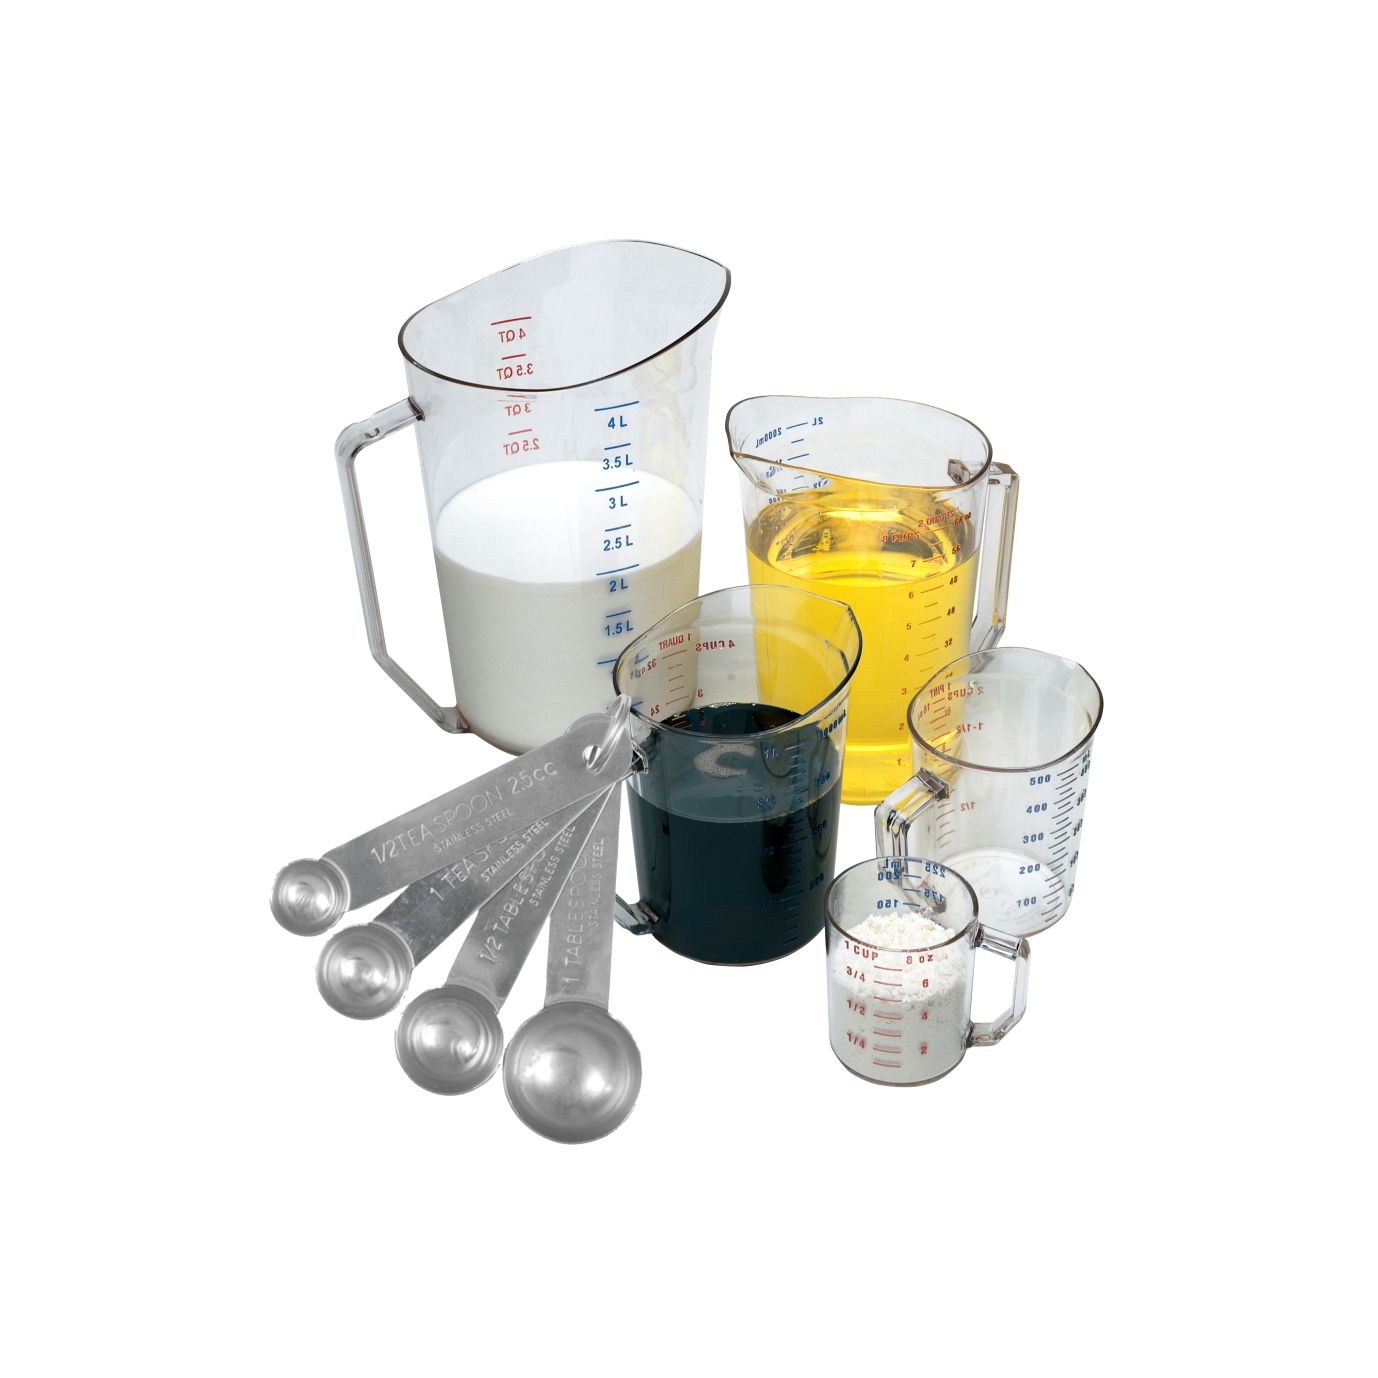 Measuring Cups and Spoons (16)